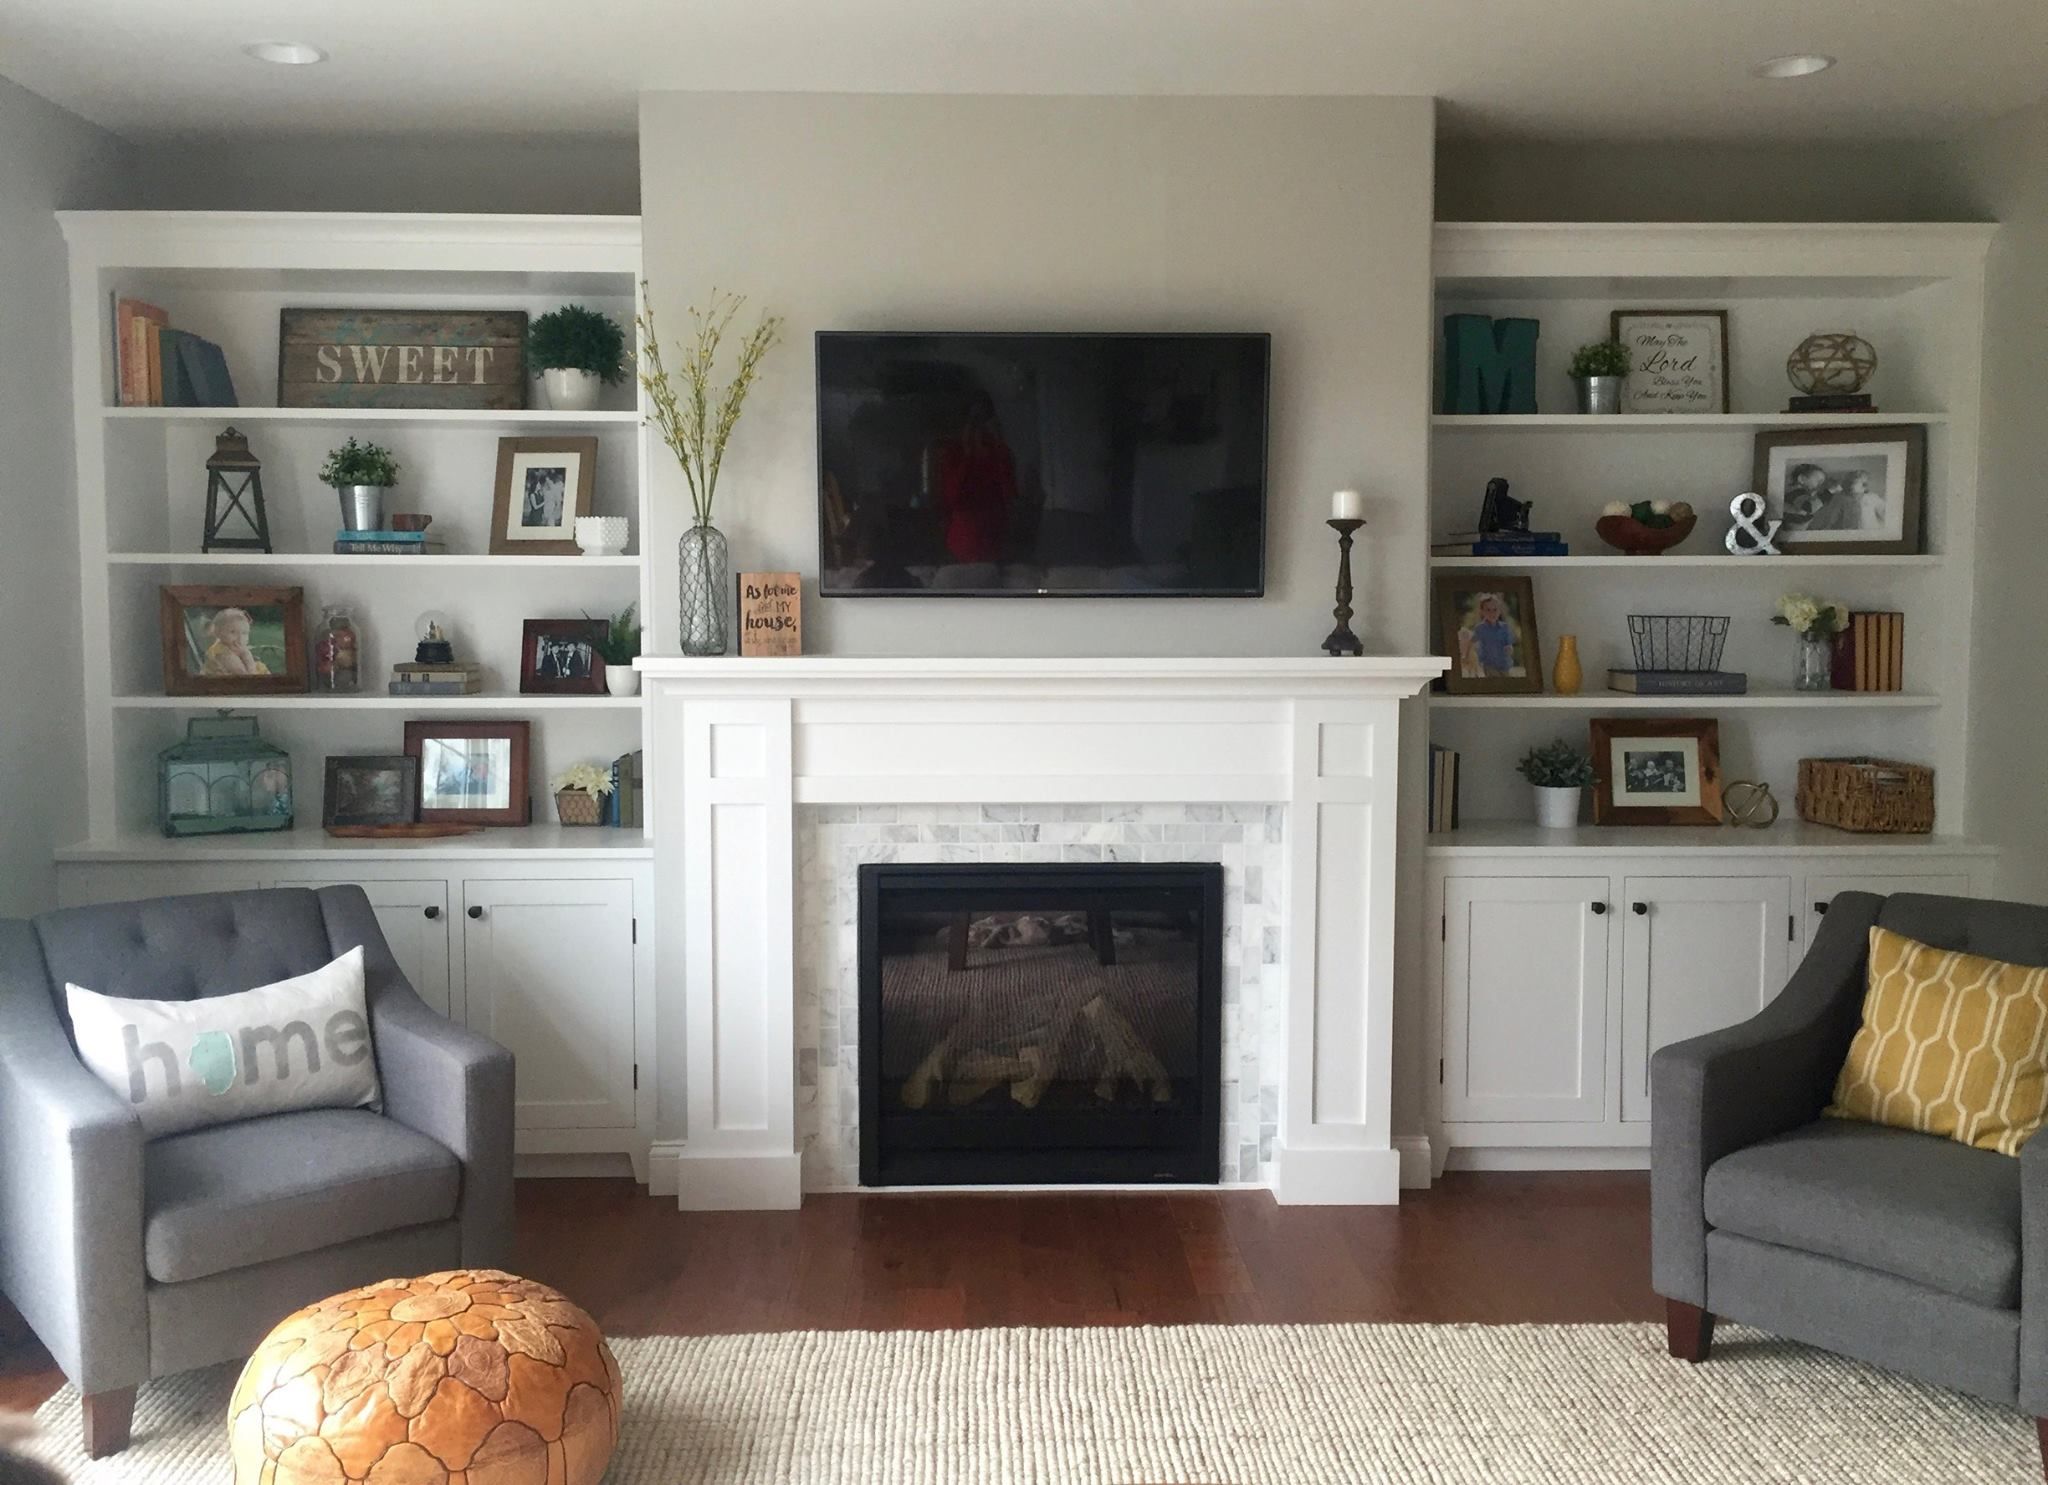 How to Install A Mantel On A Stone Fireplace Luxury How to Build A Built In the Cabinets Woodworking